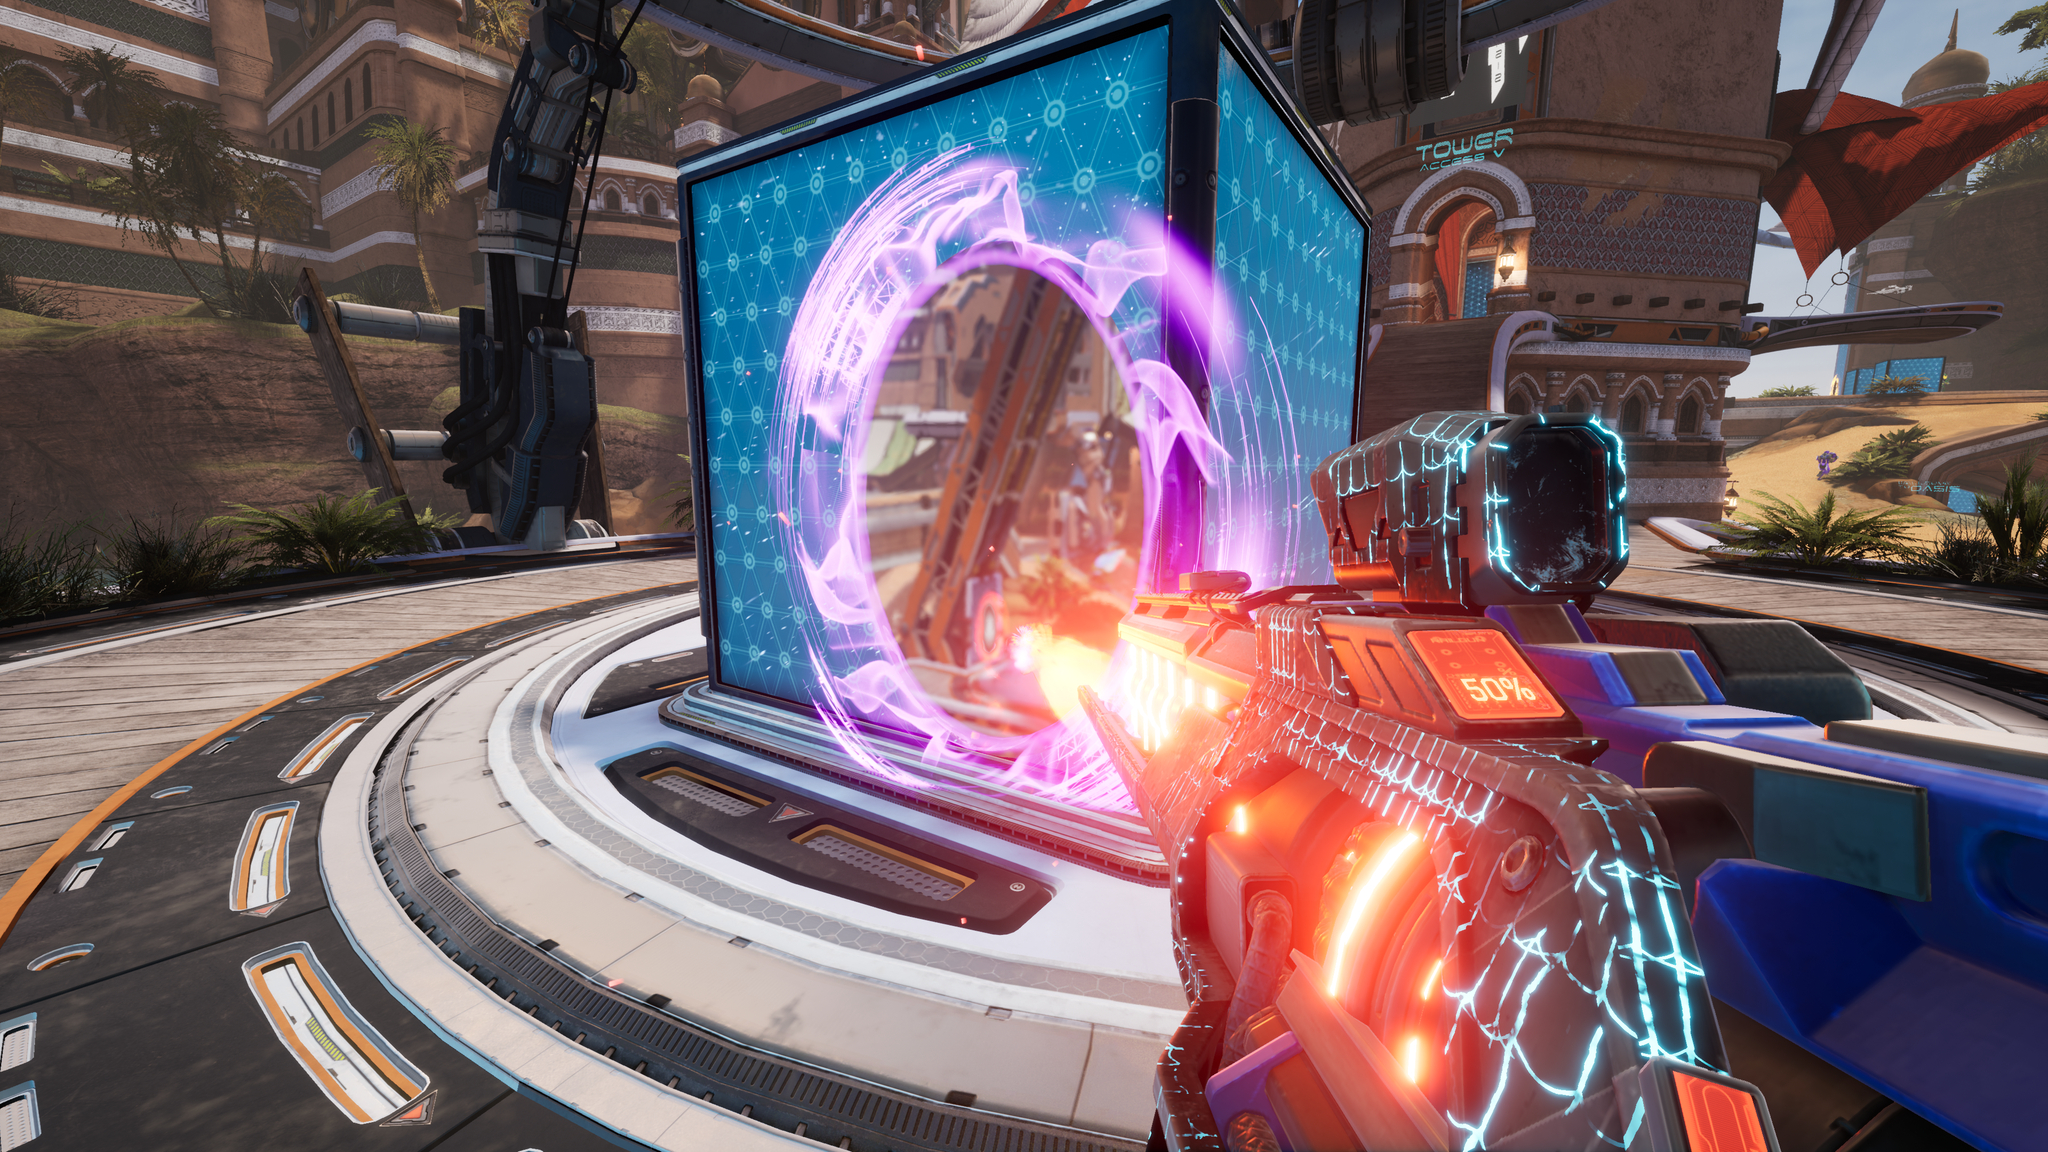 Splitgate PS5 and Xbox Series X versions are en route